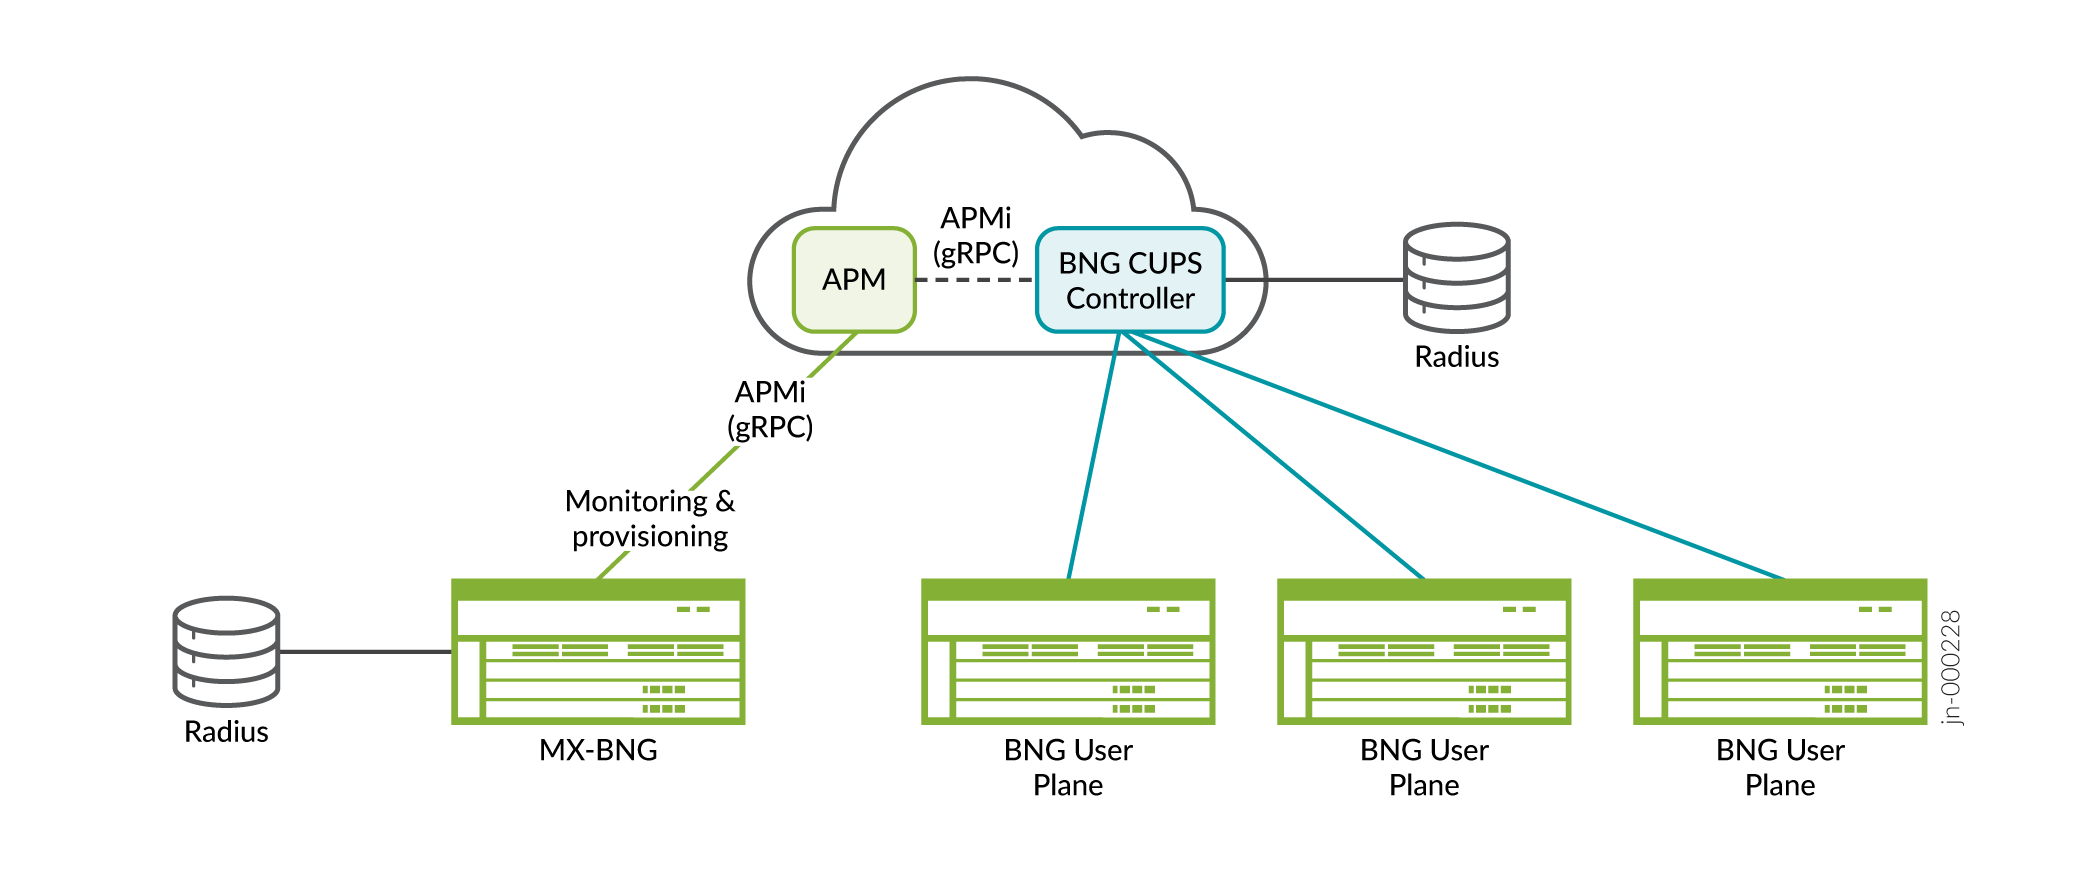 Address Pool Manager and Juniper BNG CUPS Deployment